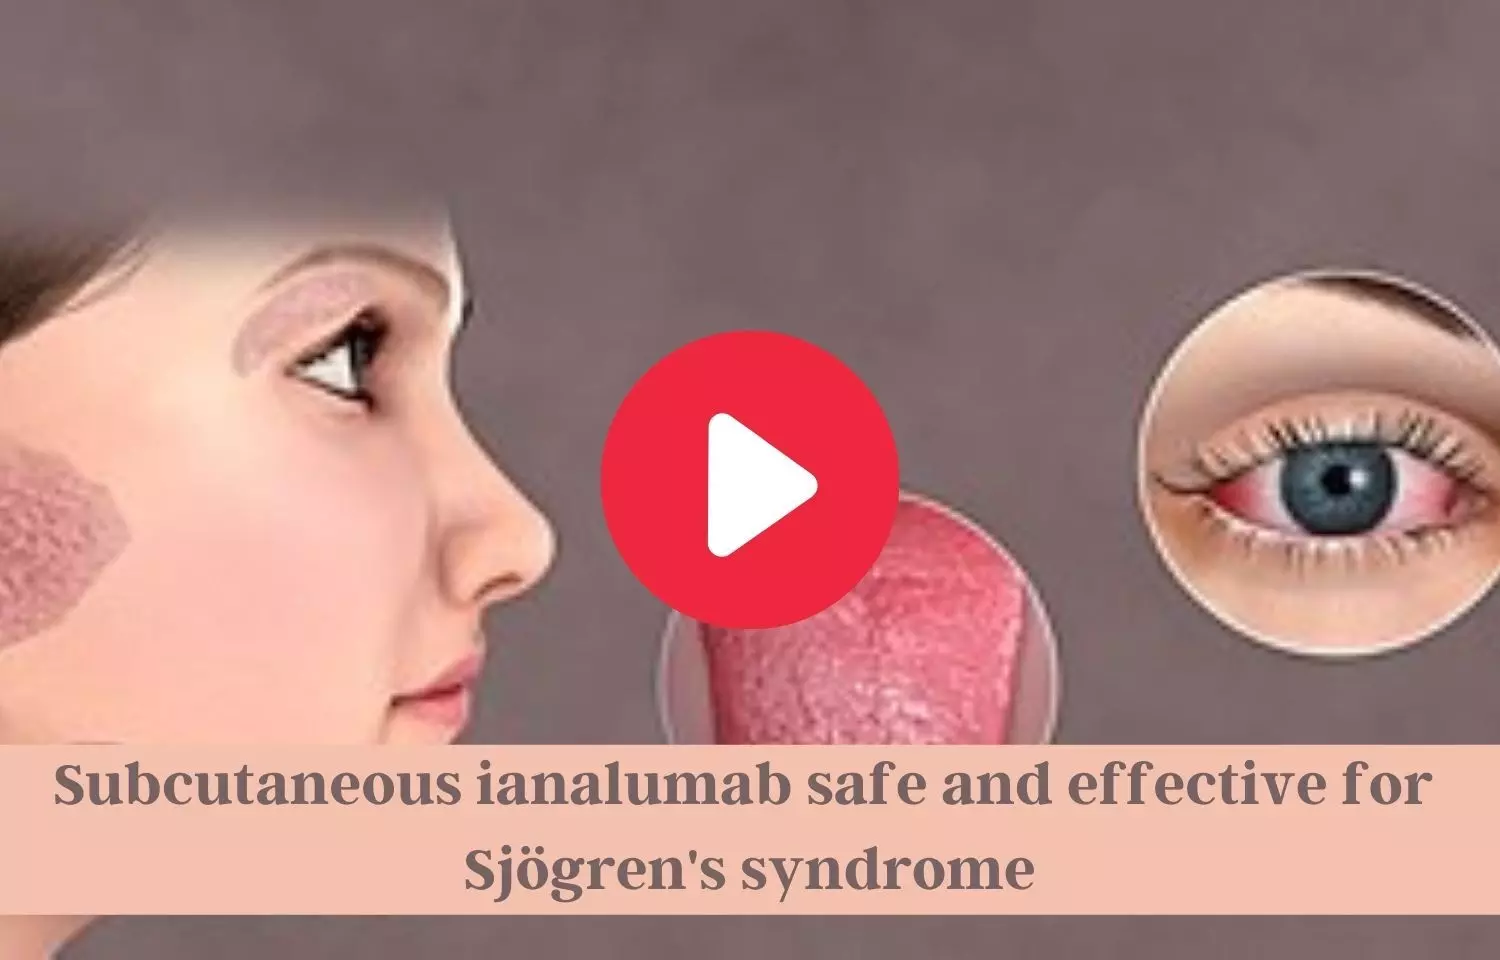 SC Ianalumab considered safe, effective in Sjögrens syndrome